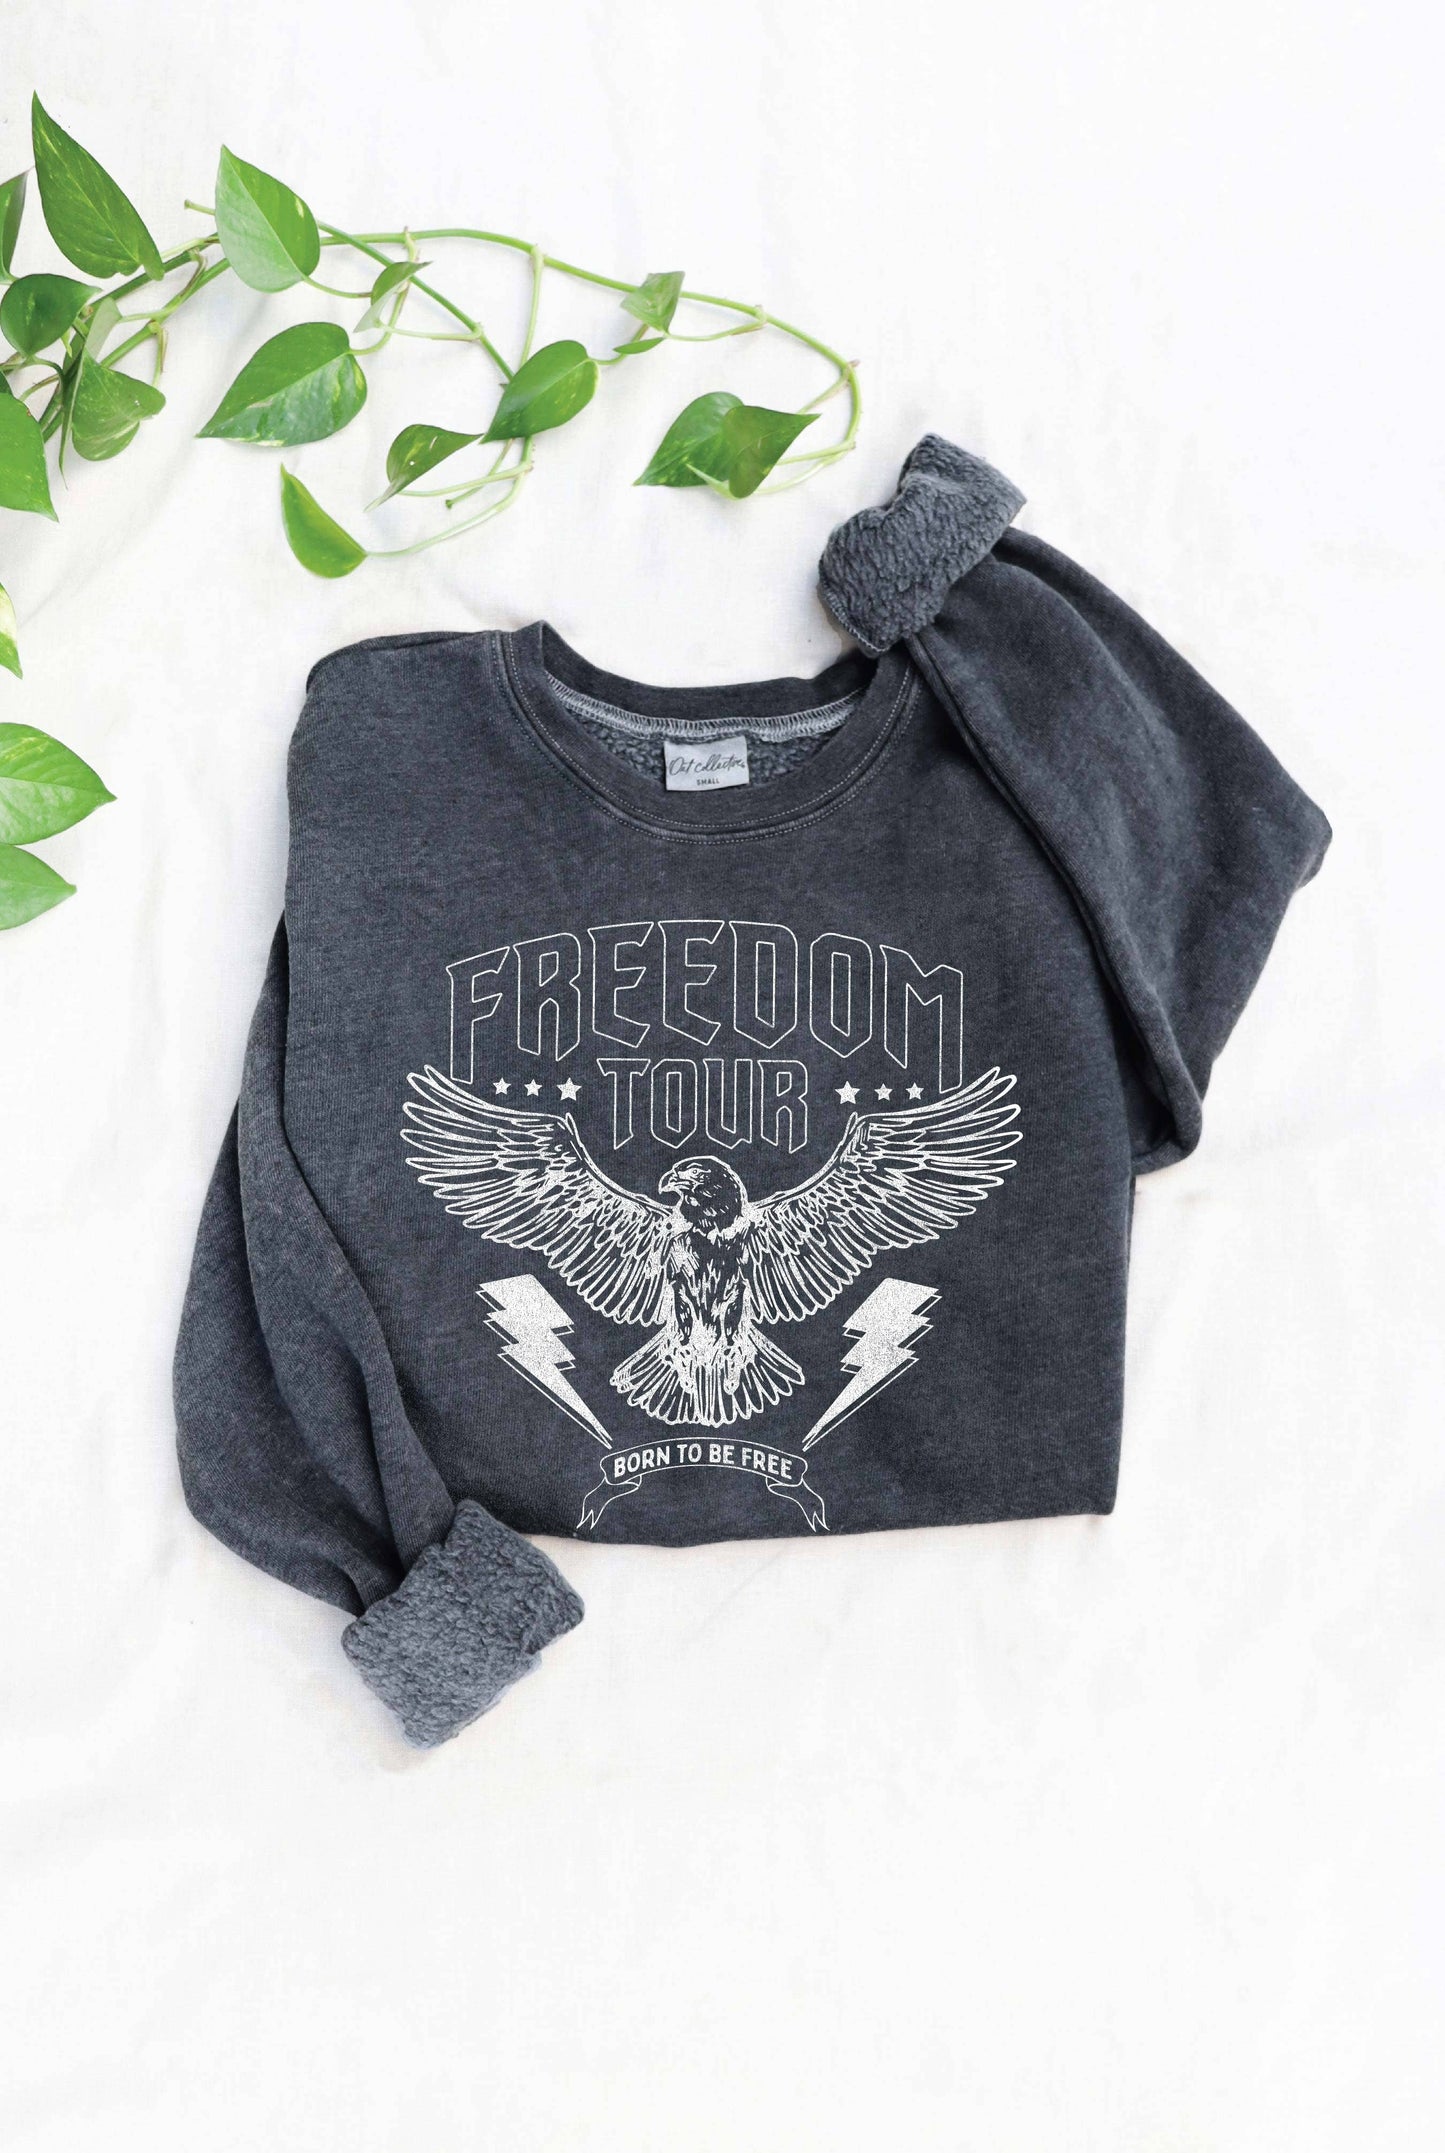 FREEDOM TOUR born to be Mineral Washed Graphic Sweatshirt